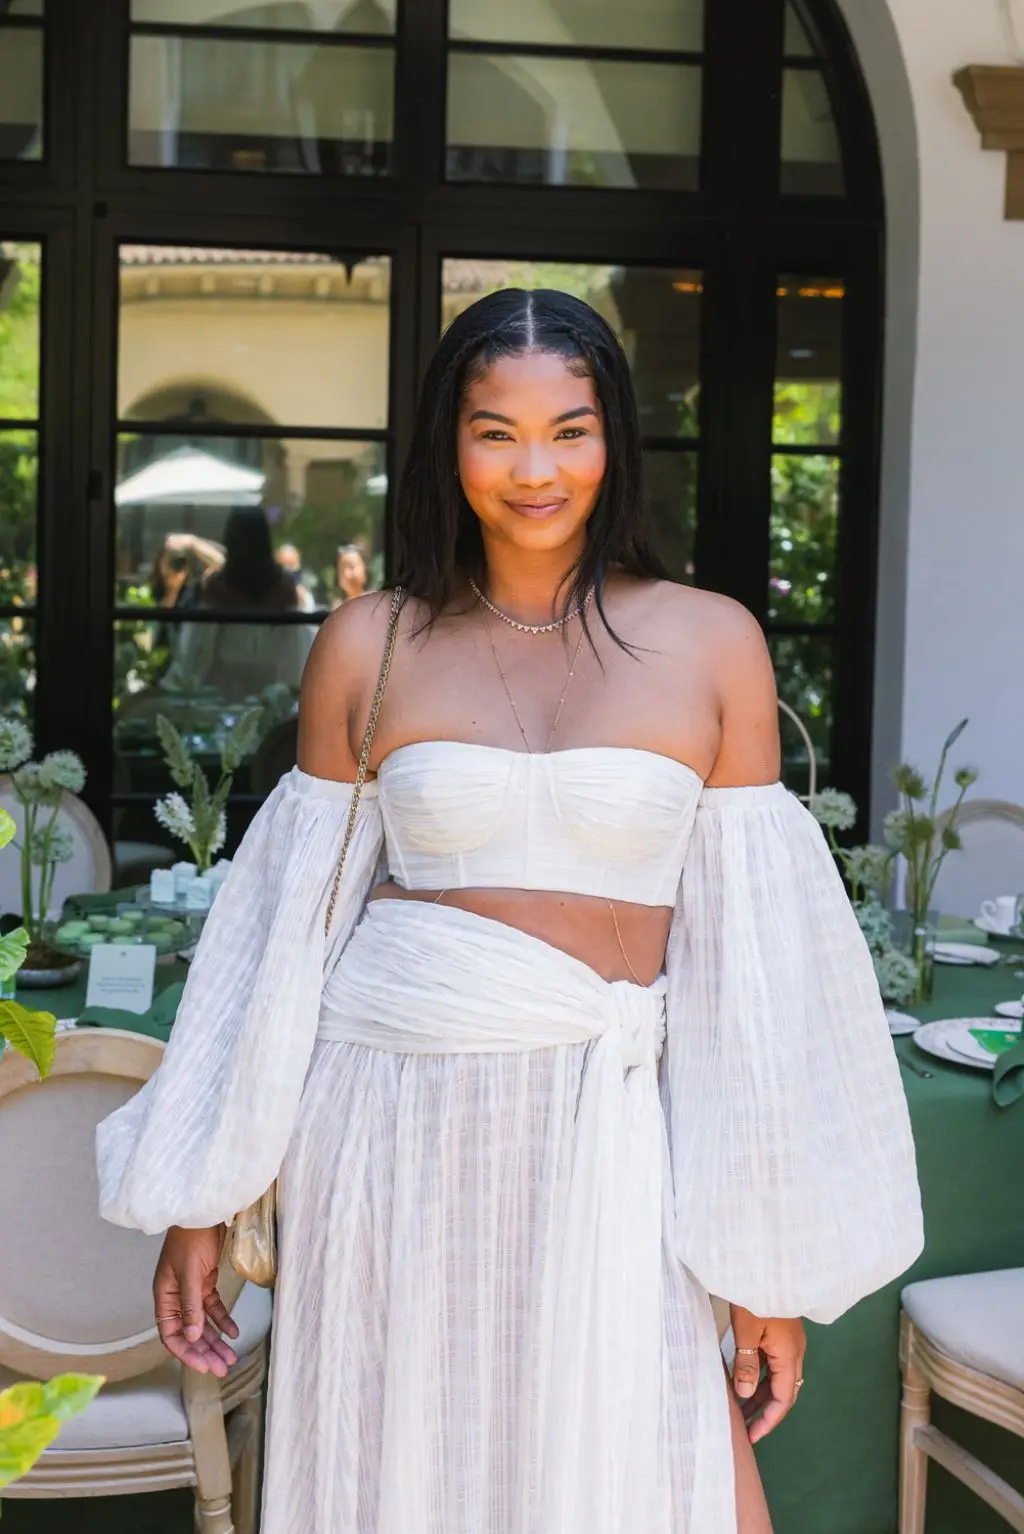 CHANEL IMAN AT A HIGH TEA LUNCHEON WITH LIPTON GREEN TEA AT THE MAYBOURNE BEVERLY HILLS3